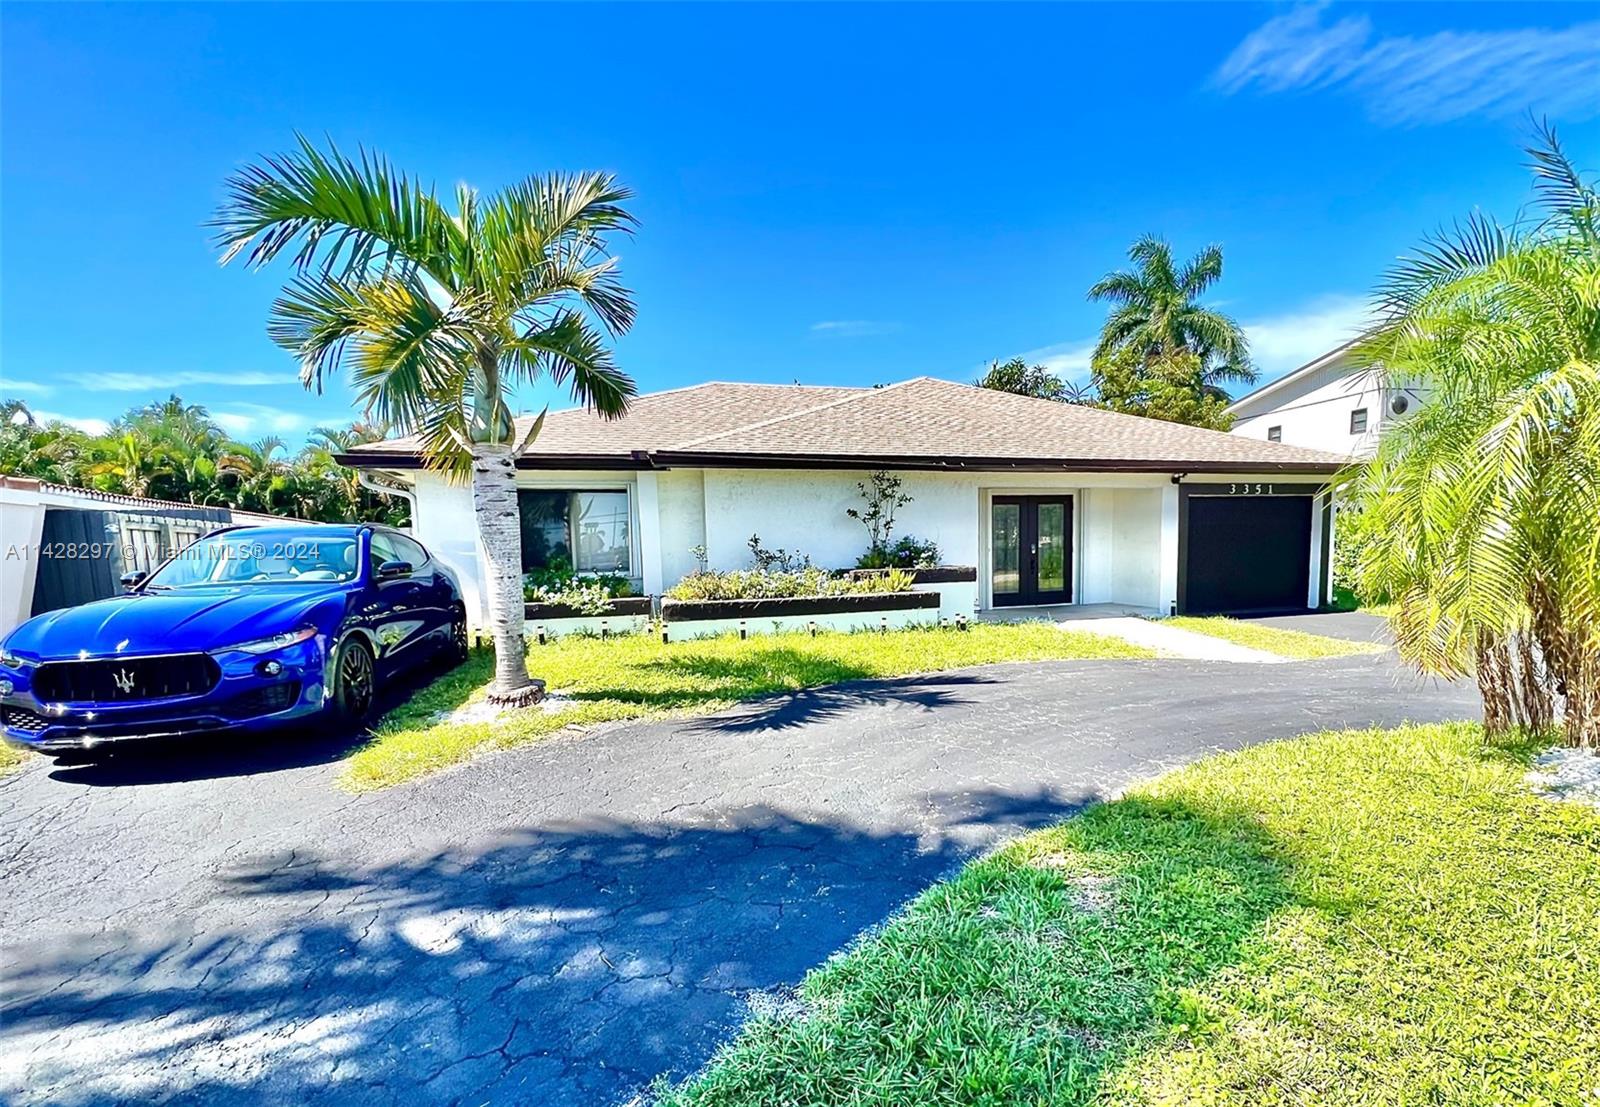 Property for Sale at 3351 Ne 20th Ave, Oakland Park, Miami-Dade County, Florida - Bedrooms: 4 
Bathrooms: 4  - $820,000